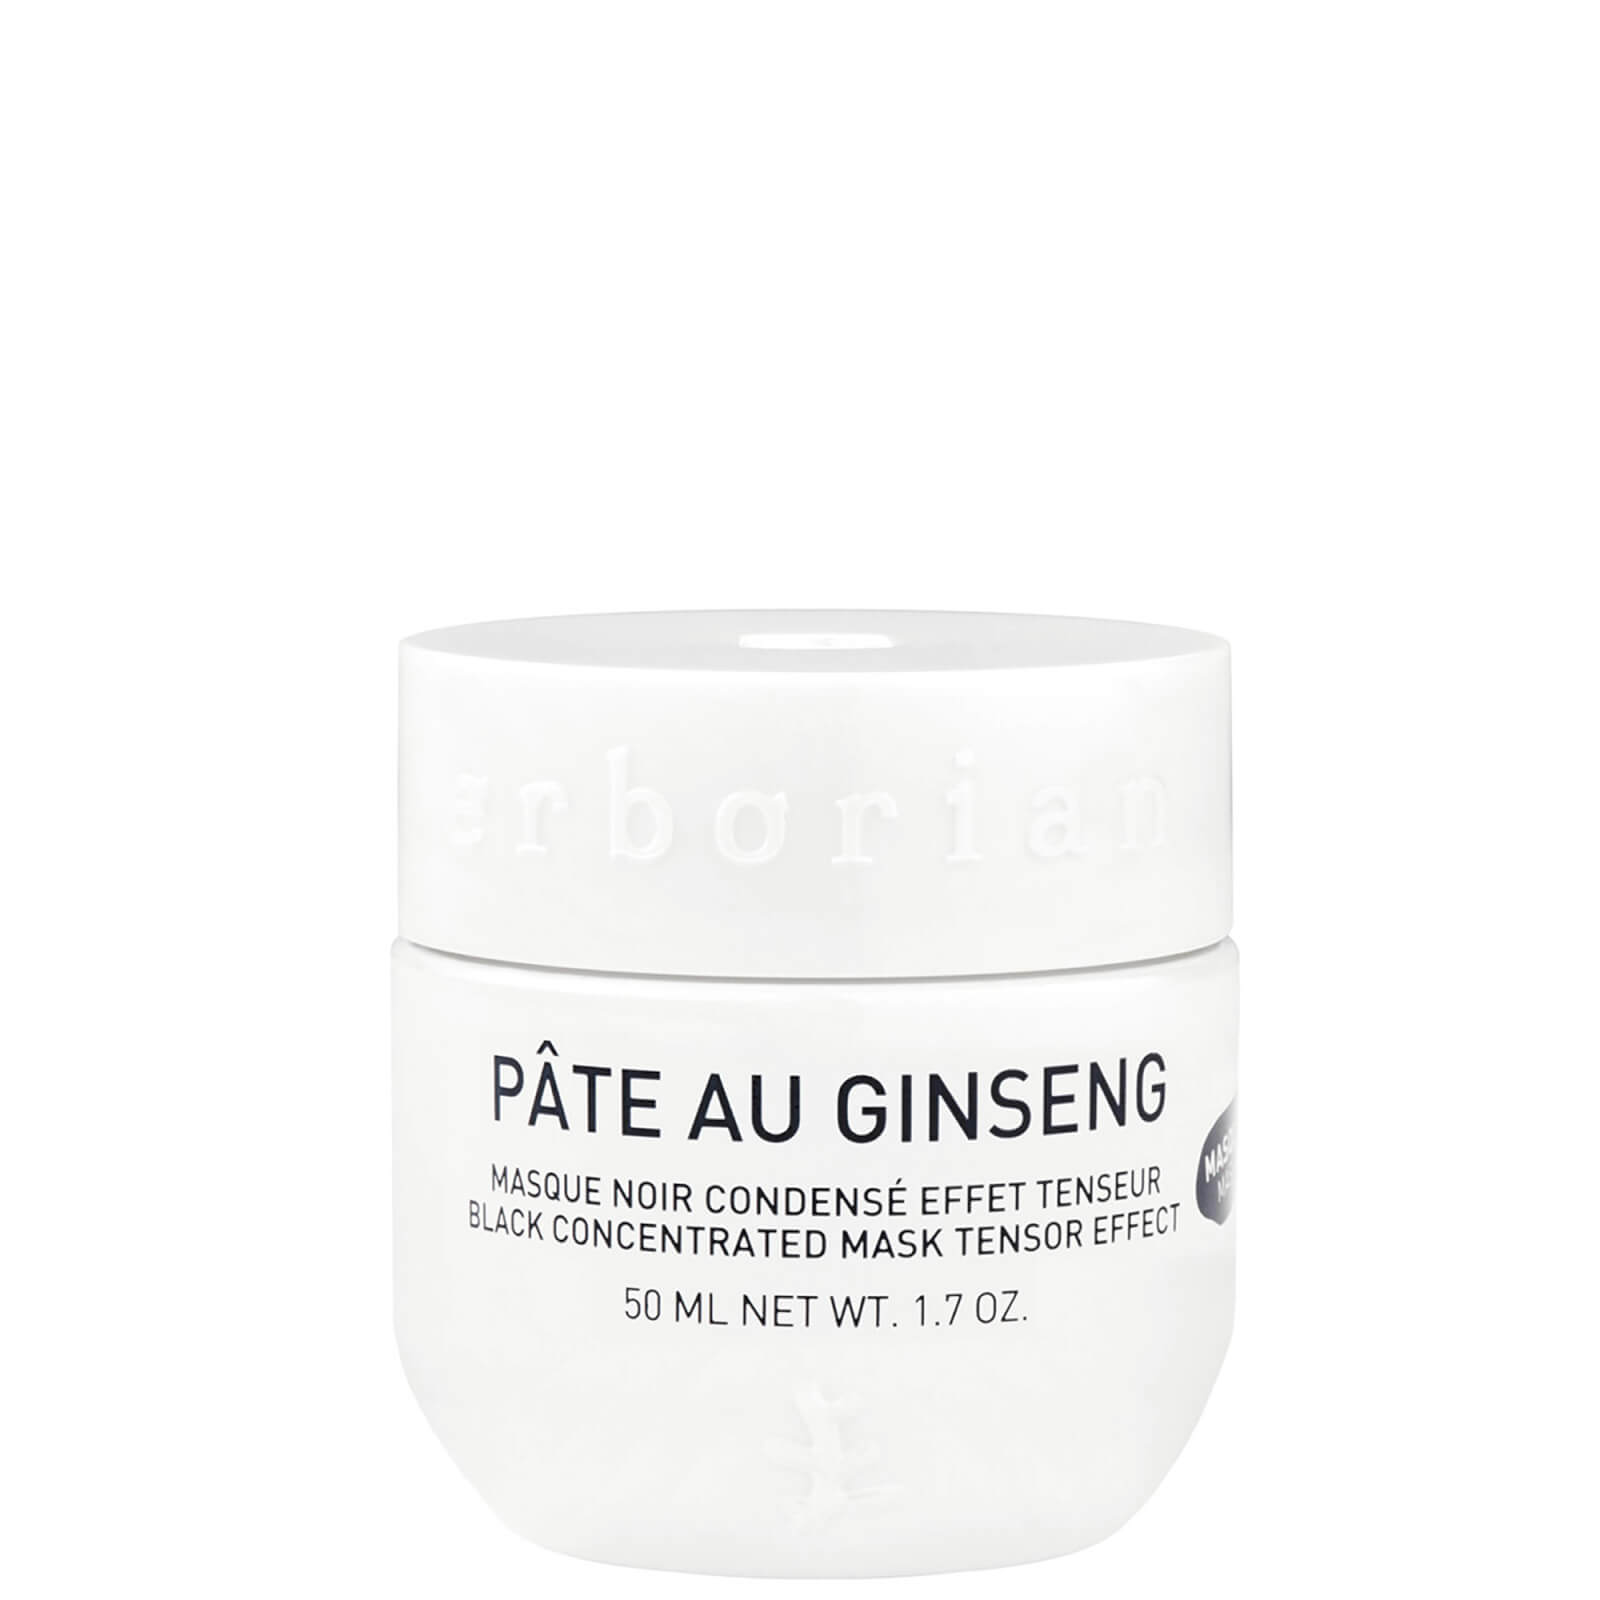 Image of Erborian Erborian Pâte au Ginseng Black Concentrated Mask 50ml